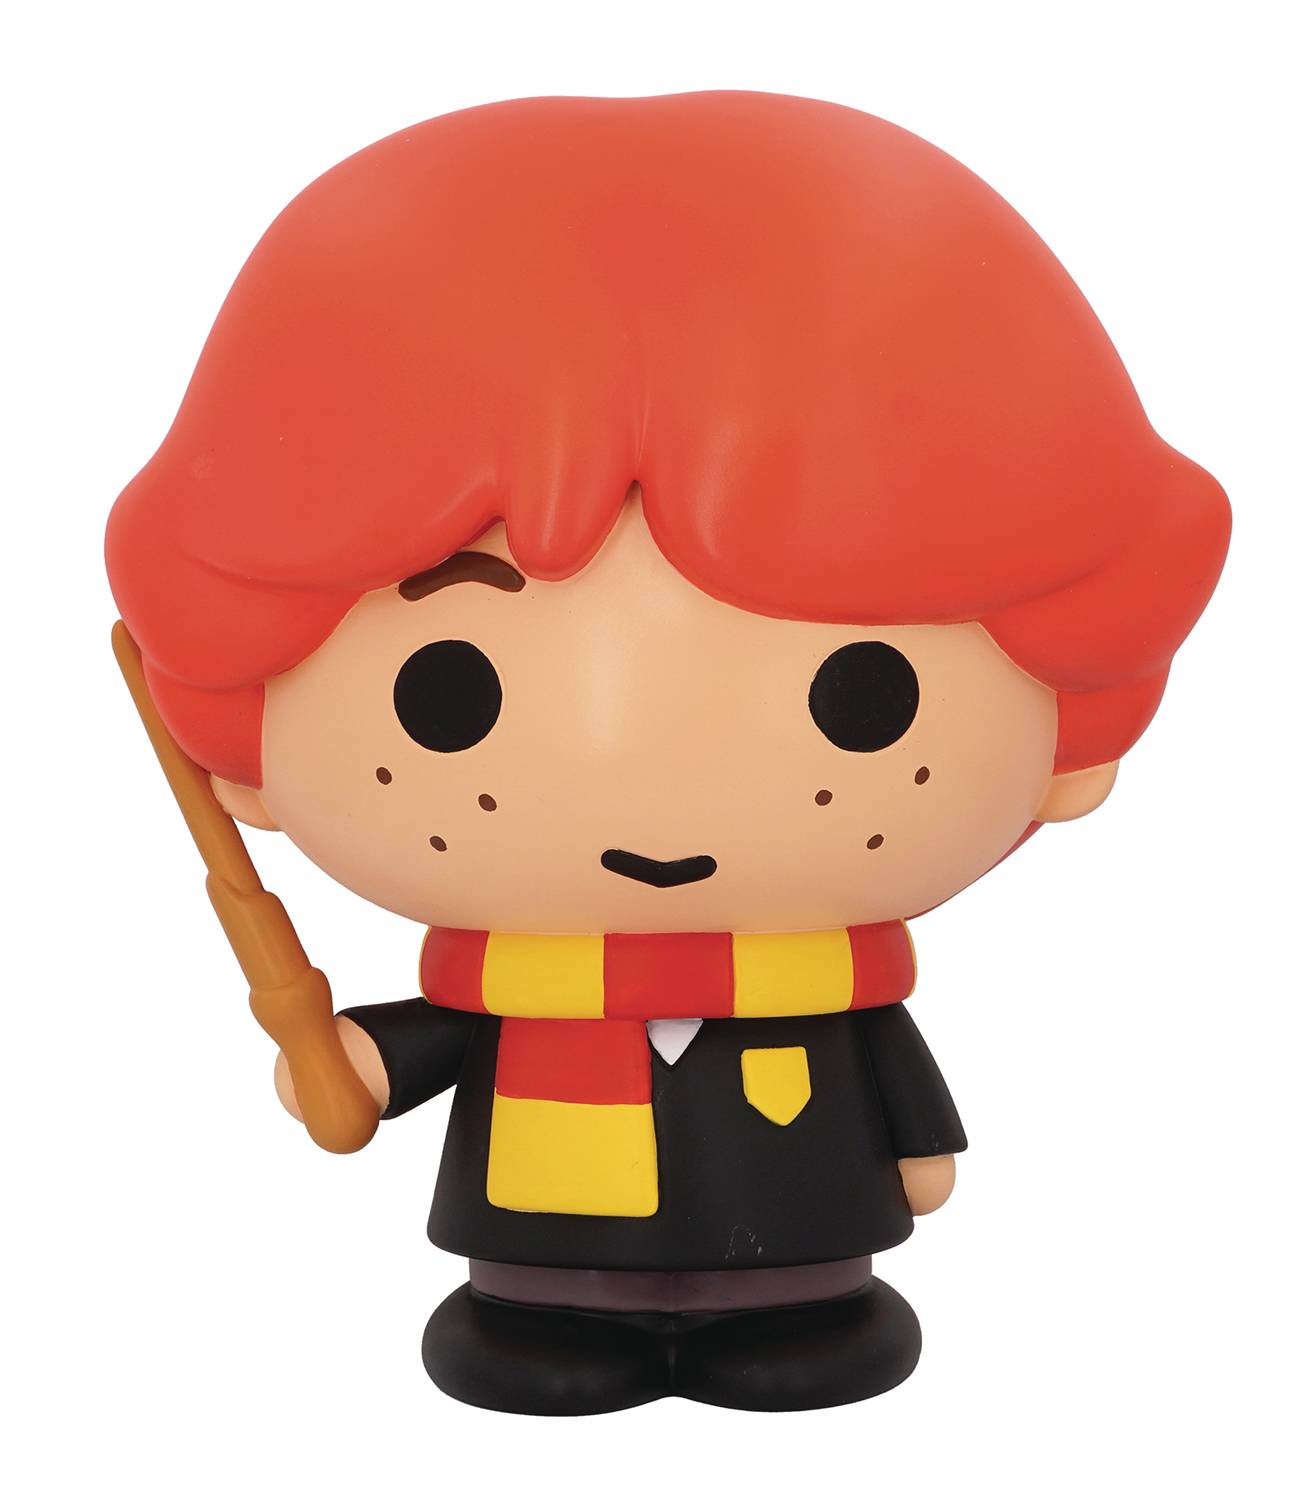 Harry Potter Ron PVC Figural Coin Bank